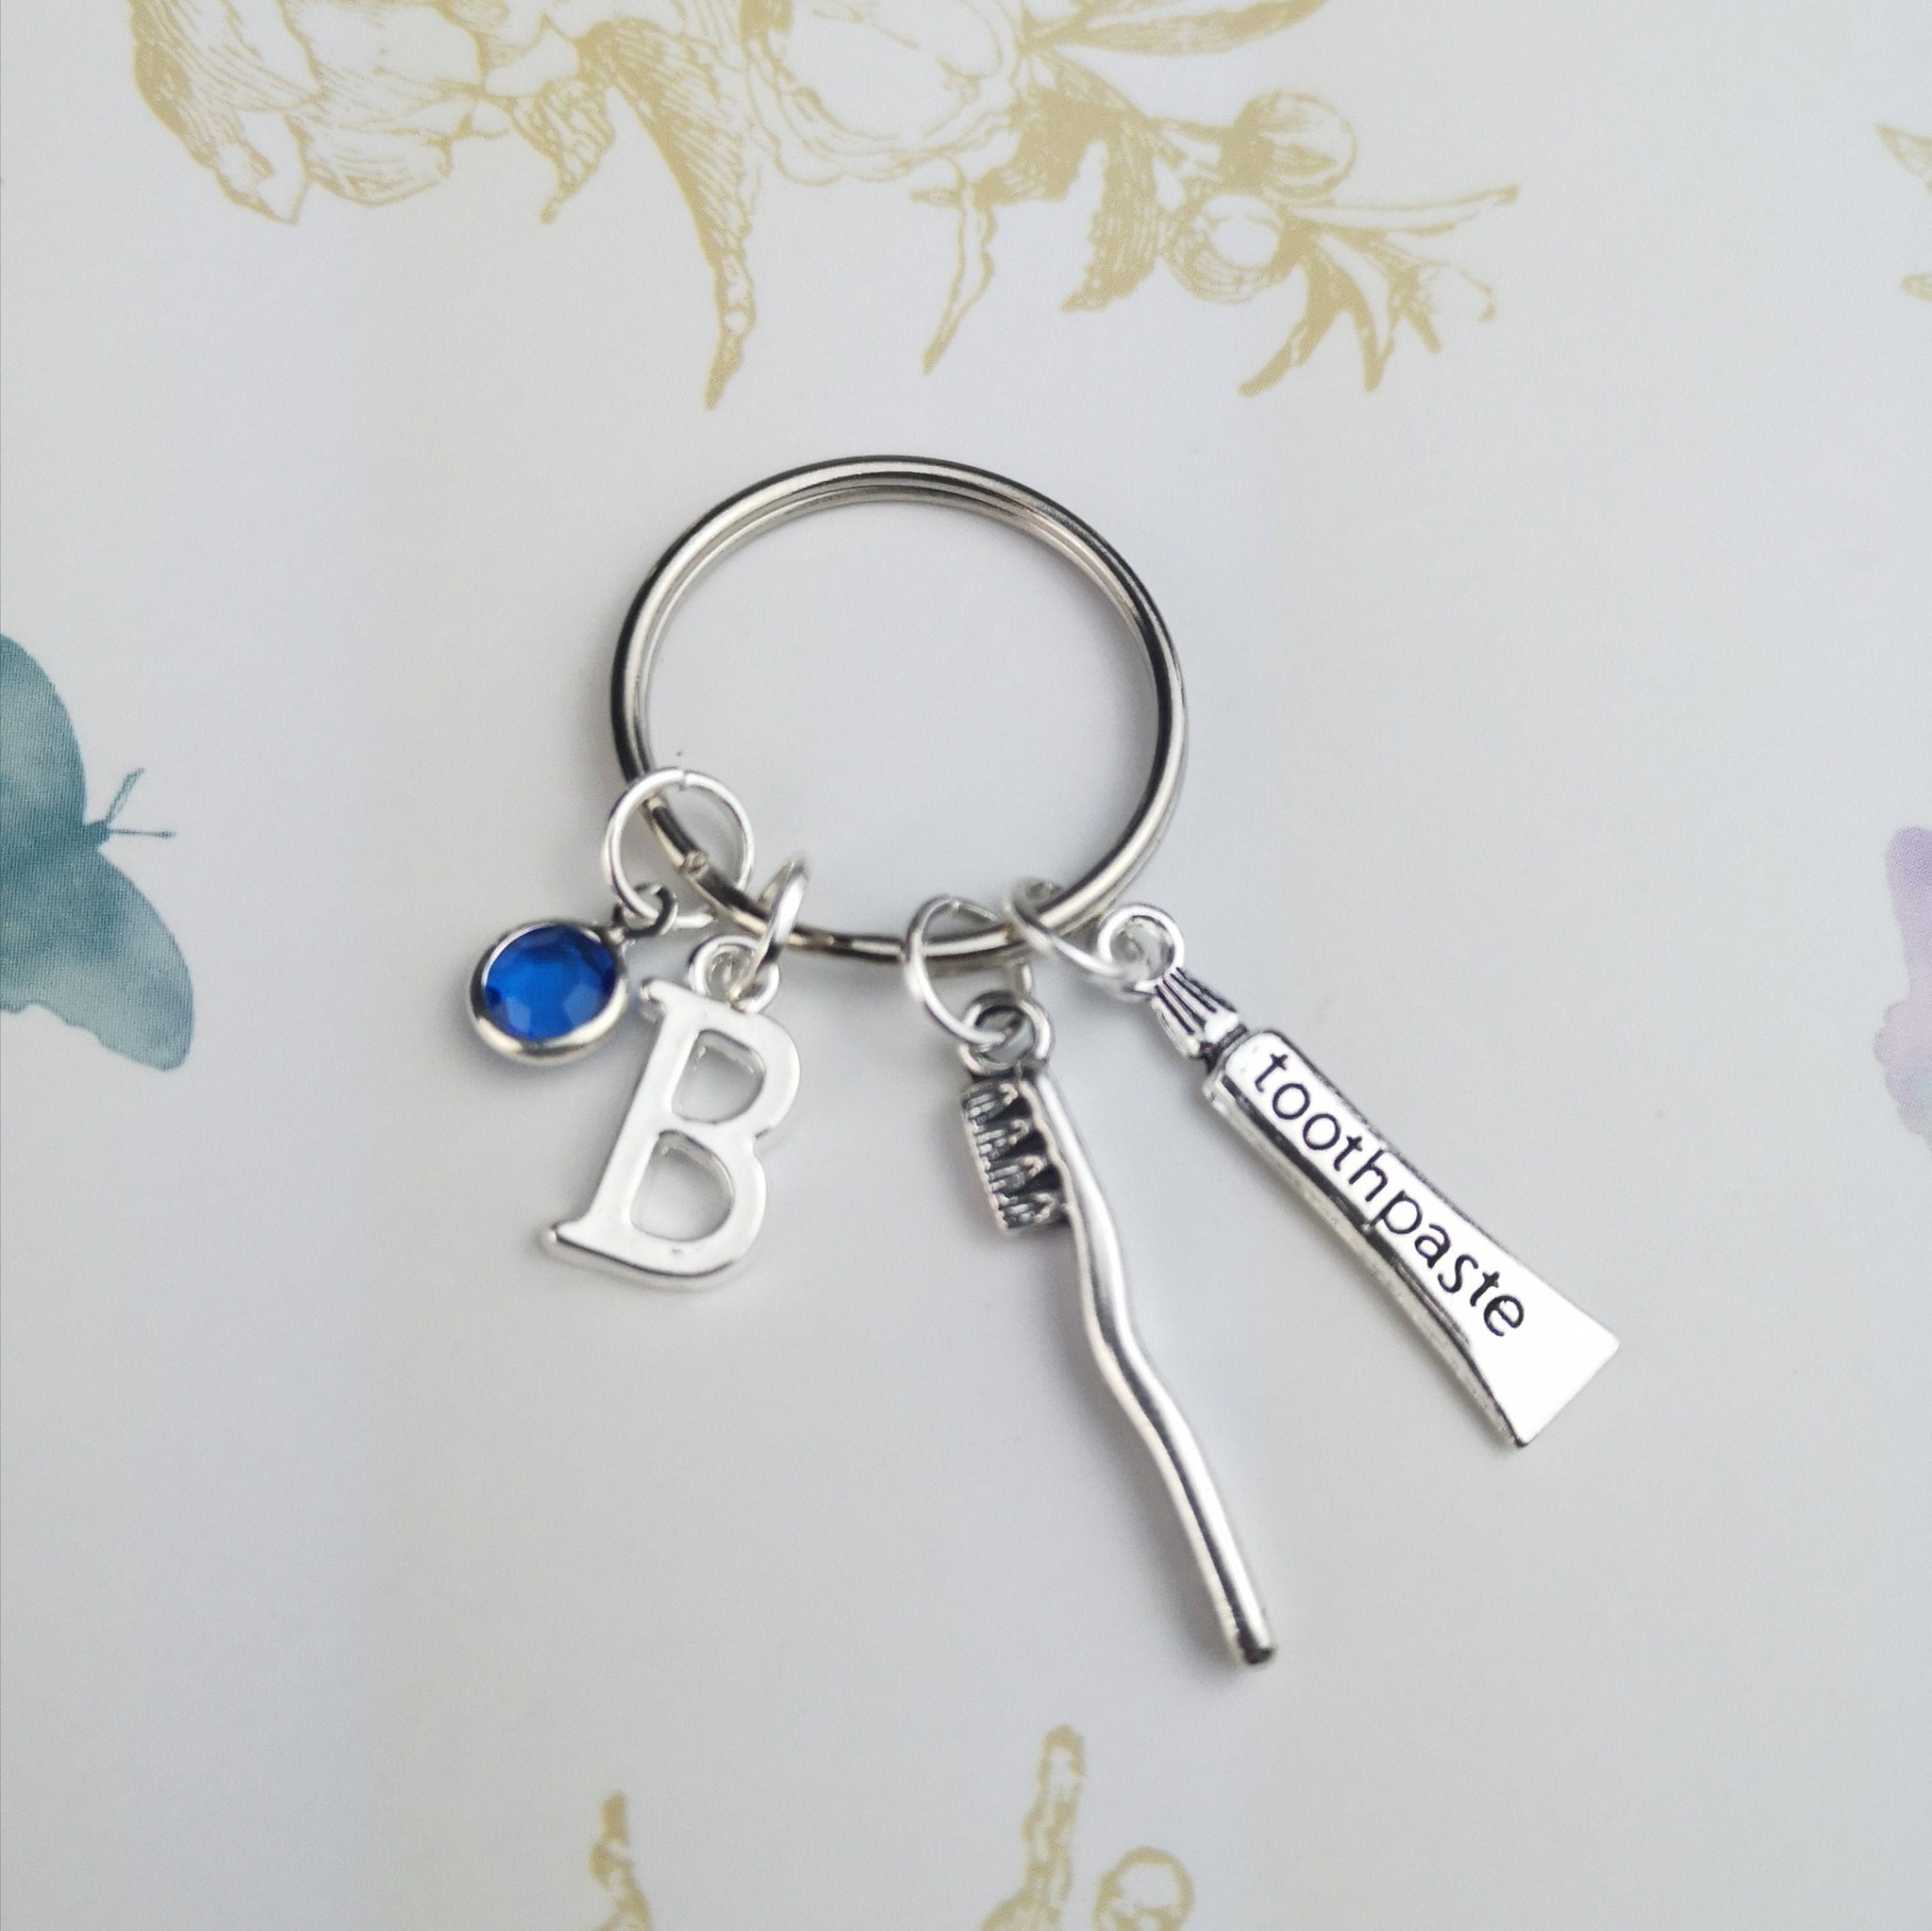 Personalised keyring with toothpaste and toothbrush charms